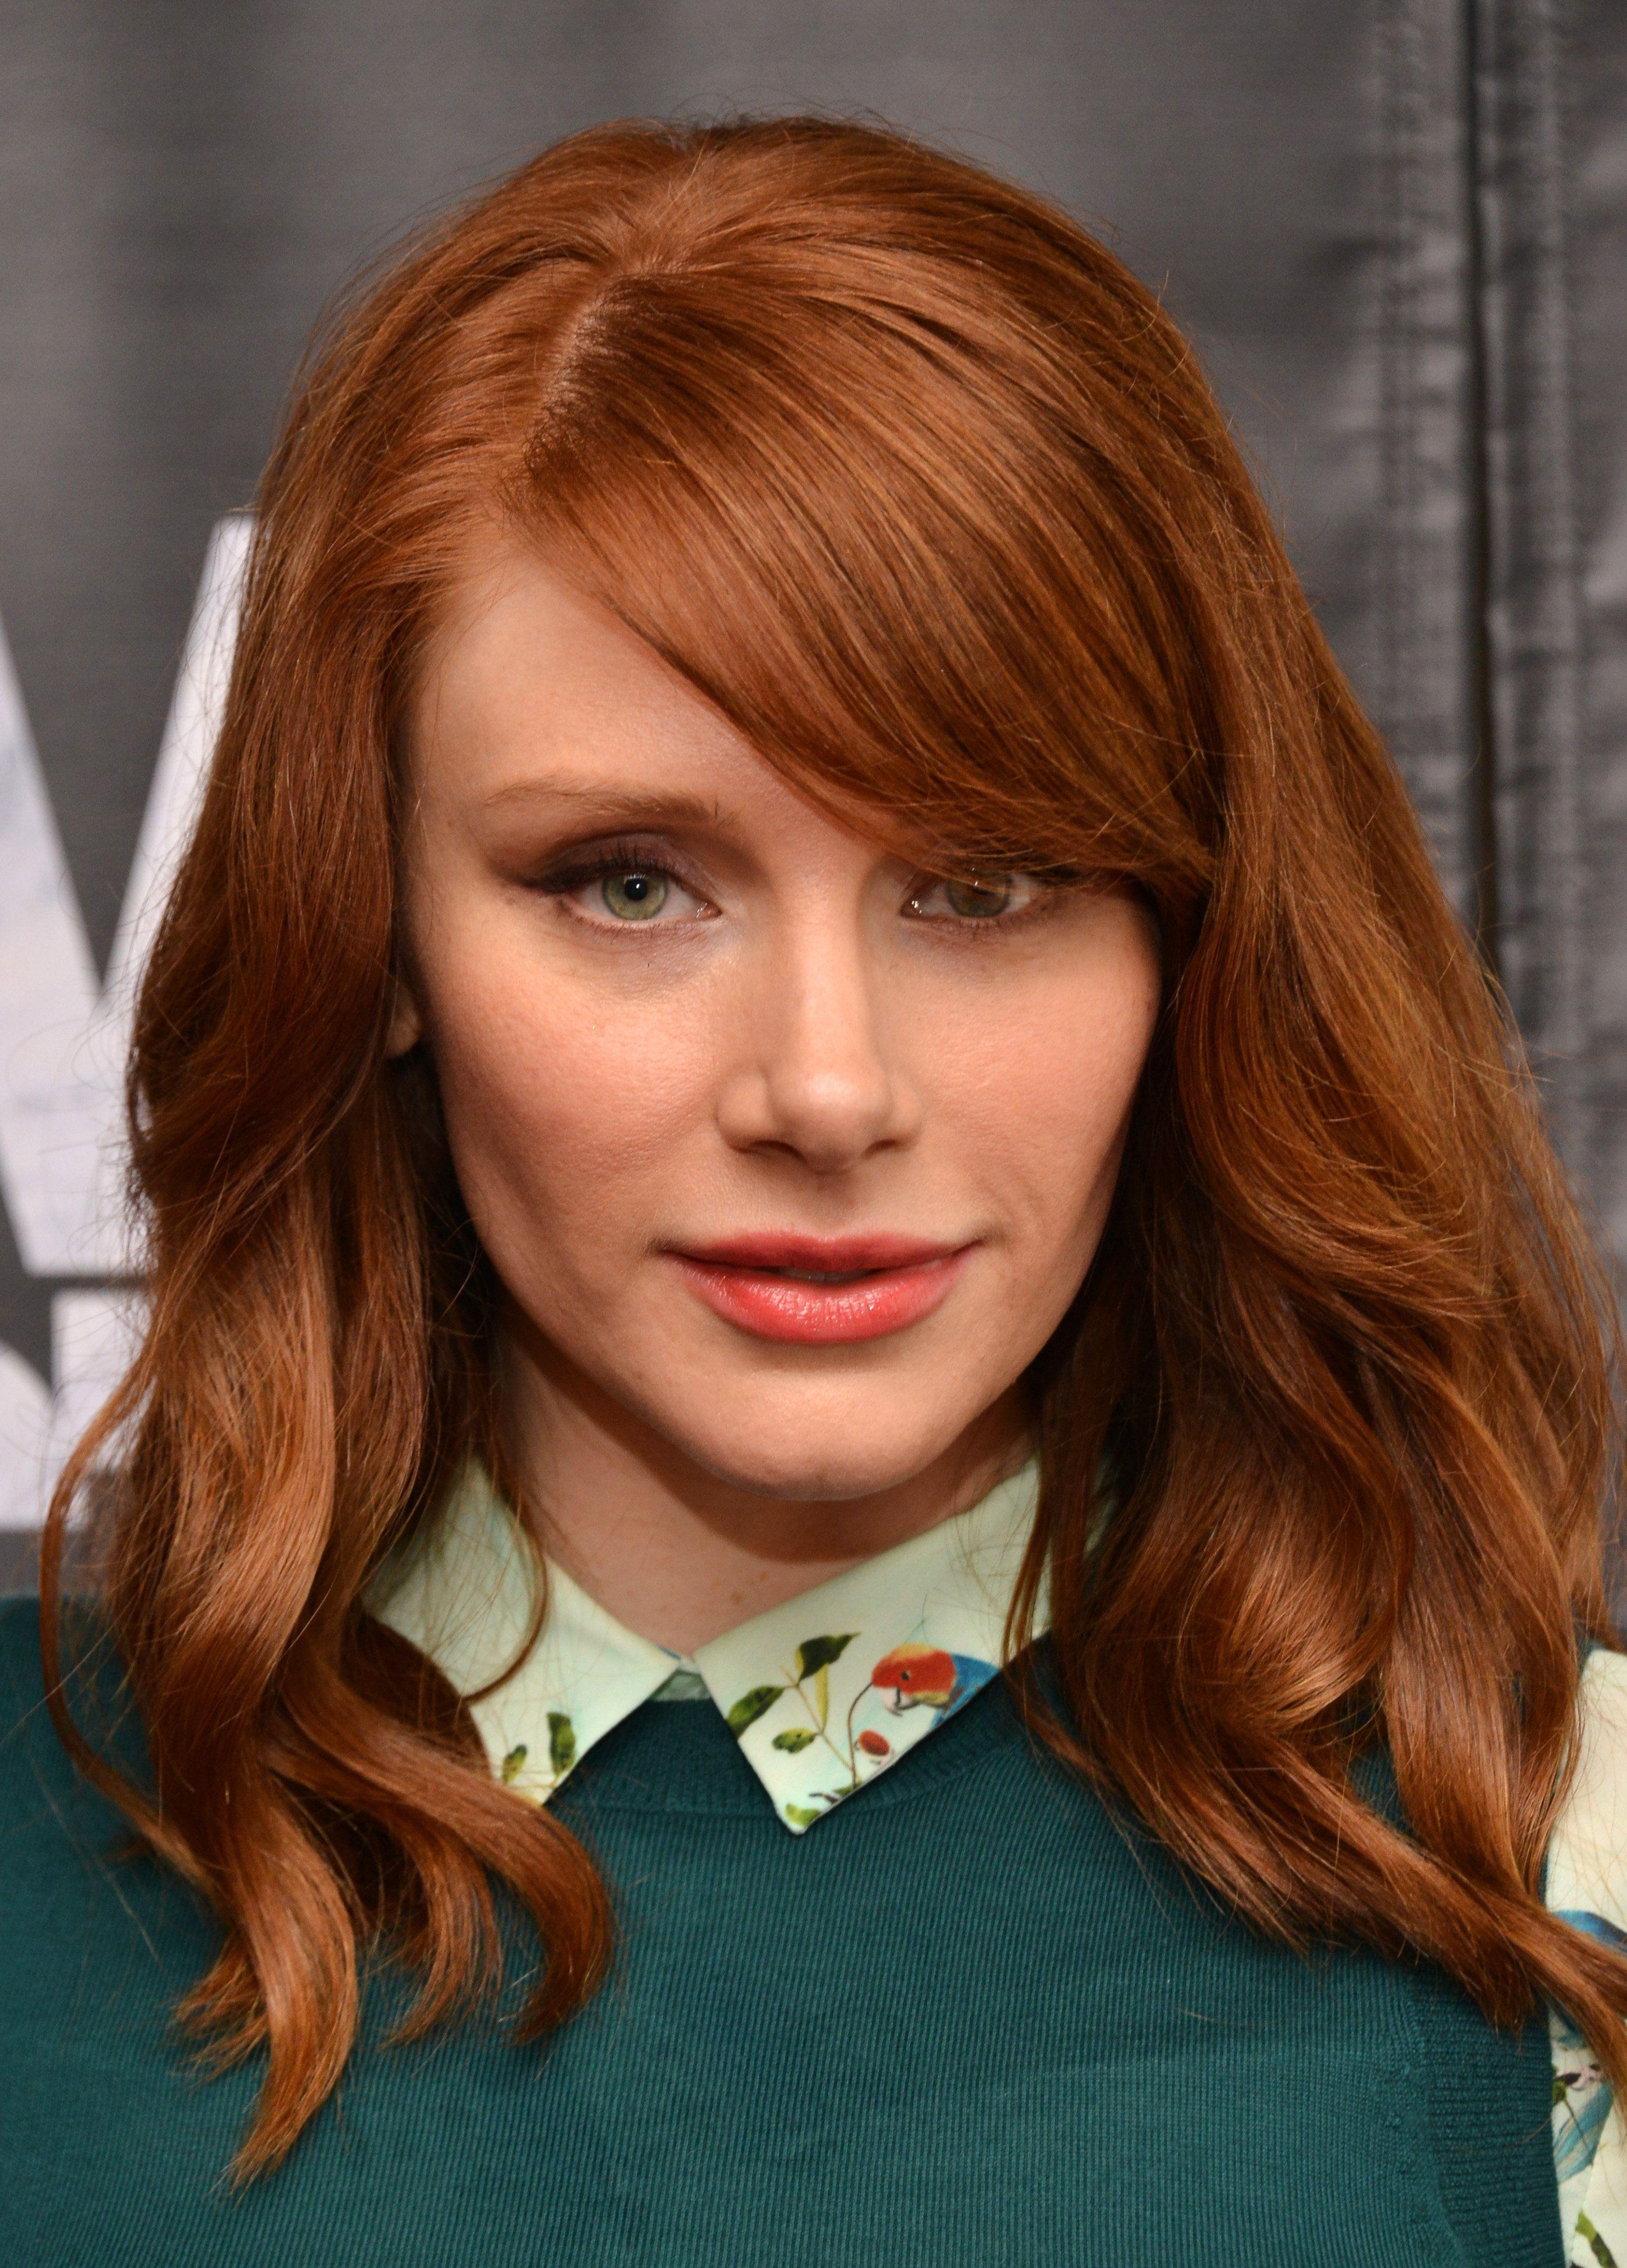 Famous redhead actress Immagine foto